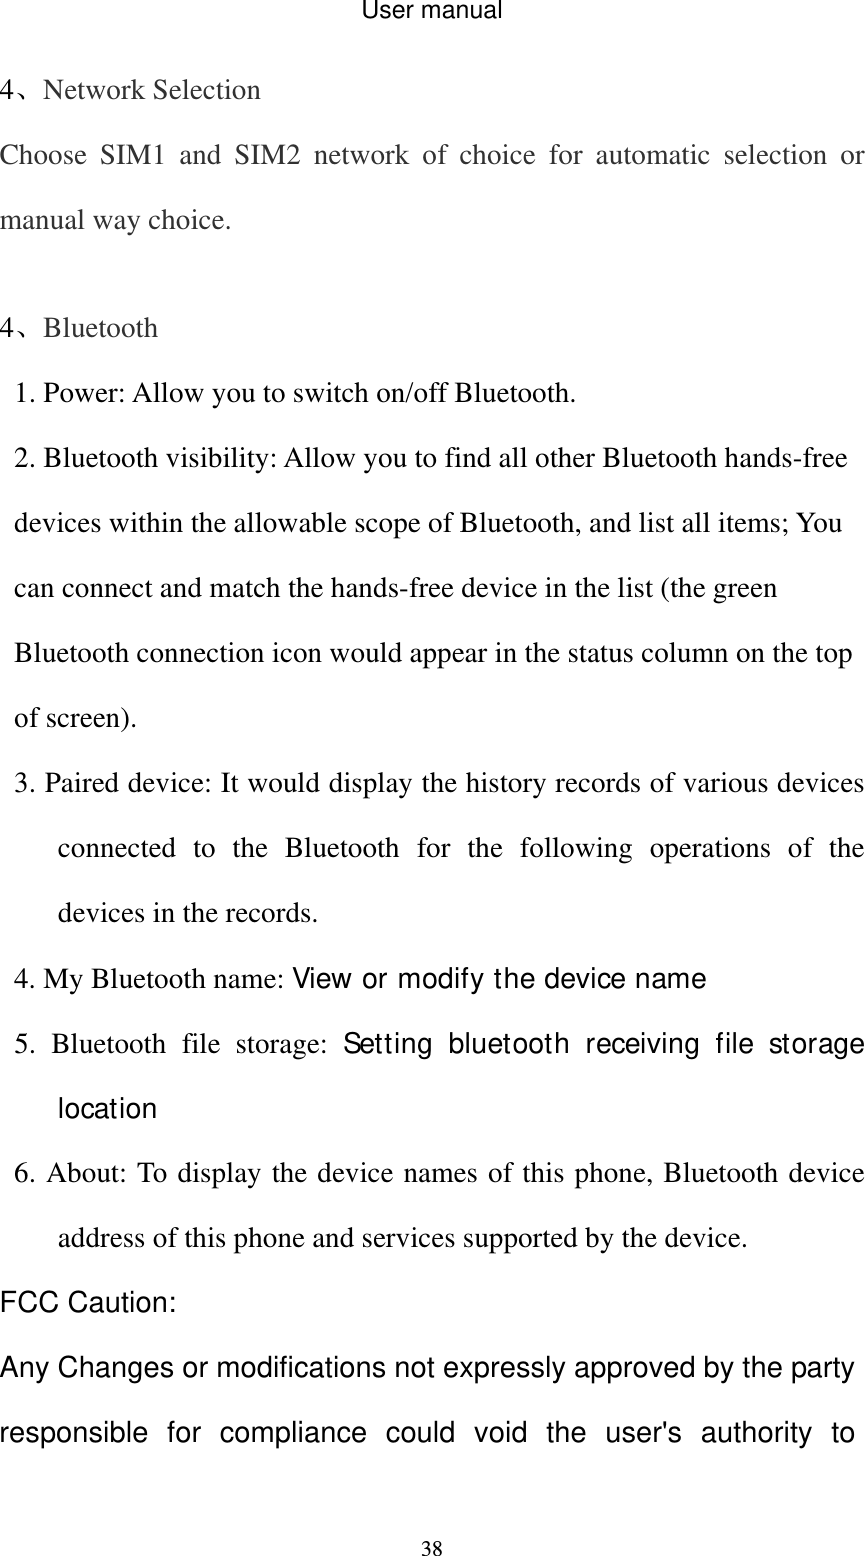 User manual  384、Network Selection Choose SIM1 and SIM2 network of choice for automatic selection or manual way choice.  4、Bluetooth 1. Power: Allow you to switch on/off Bluetooth.   2. Bluetooth visibility: Allow you to find all other Bluetooth hands-free devices within the allowable scope of Bluetooth, and list all items; You can connect and match the hands-free device in the list (the green Bluetooth connection icon would appear in the status column on the top of screen).   3. Paired device: It would display the history records of various devices connected to the Bluetooth for the following operations of the devices in the records. 4. My Bluetooth name: View or modify the device name 5. Bluetooth file storage: Setting bluetooth receiving file storage location 6. About: To display the device names of this phone, Bluetooth device address of this phone and services supported by the device. FCC Caution: Any Changes or modifications not expressly approved by the party responsible for compliance could void the user&apos;s authority to 